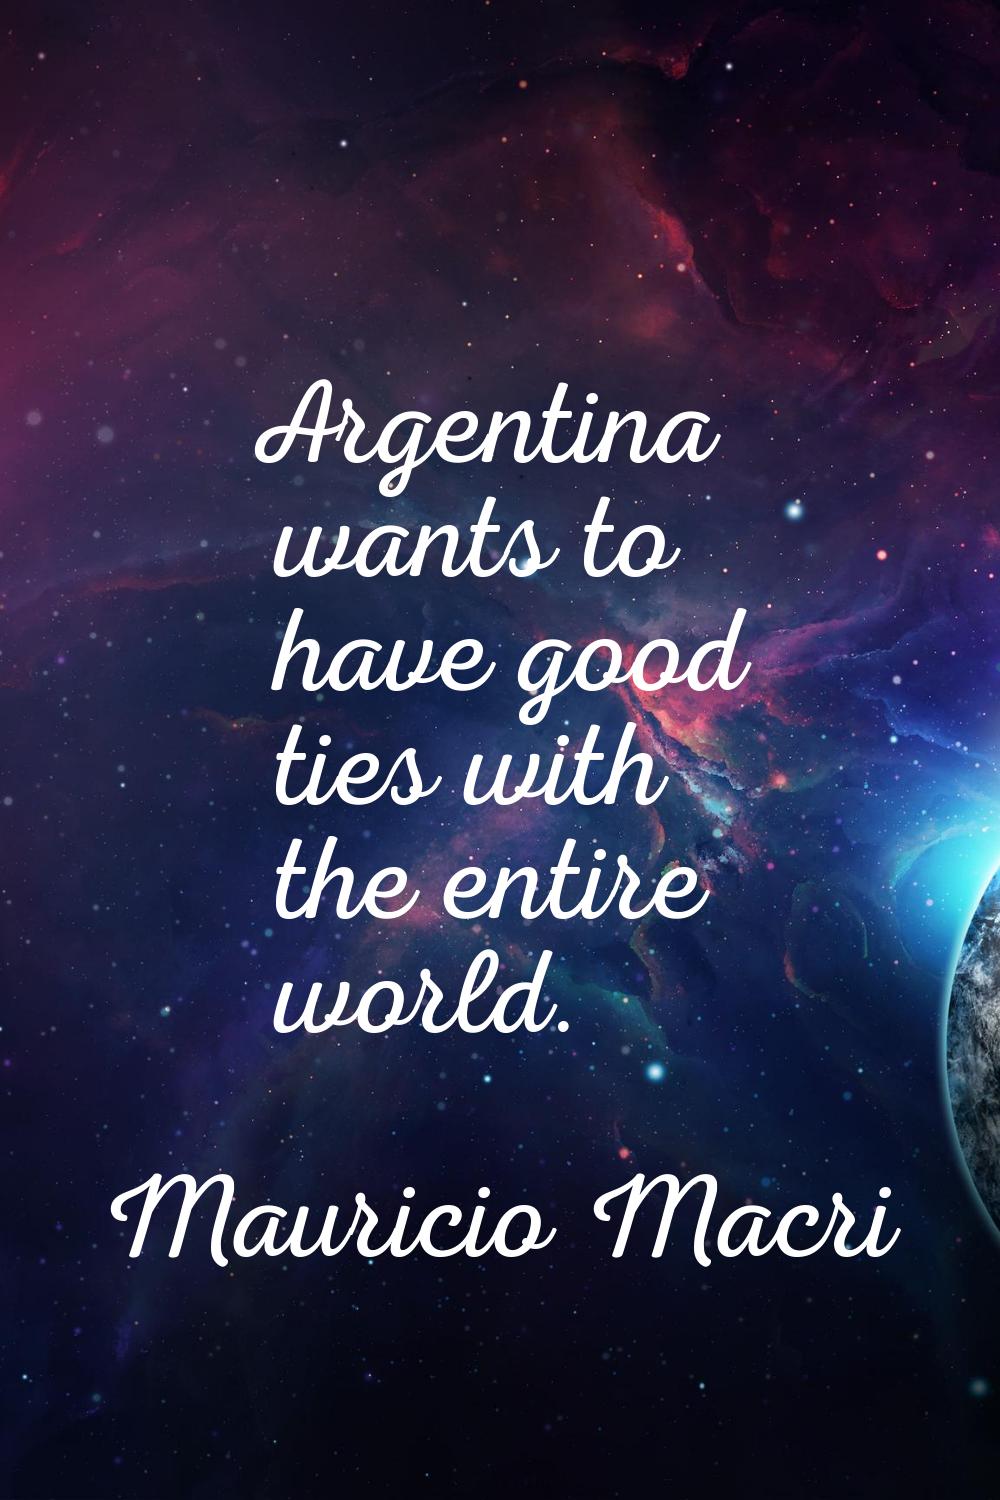 Argentina wants to have good ties with the entire world.